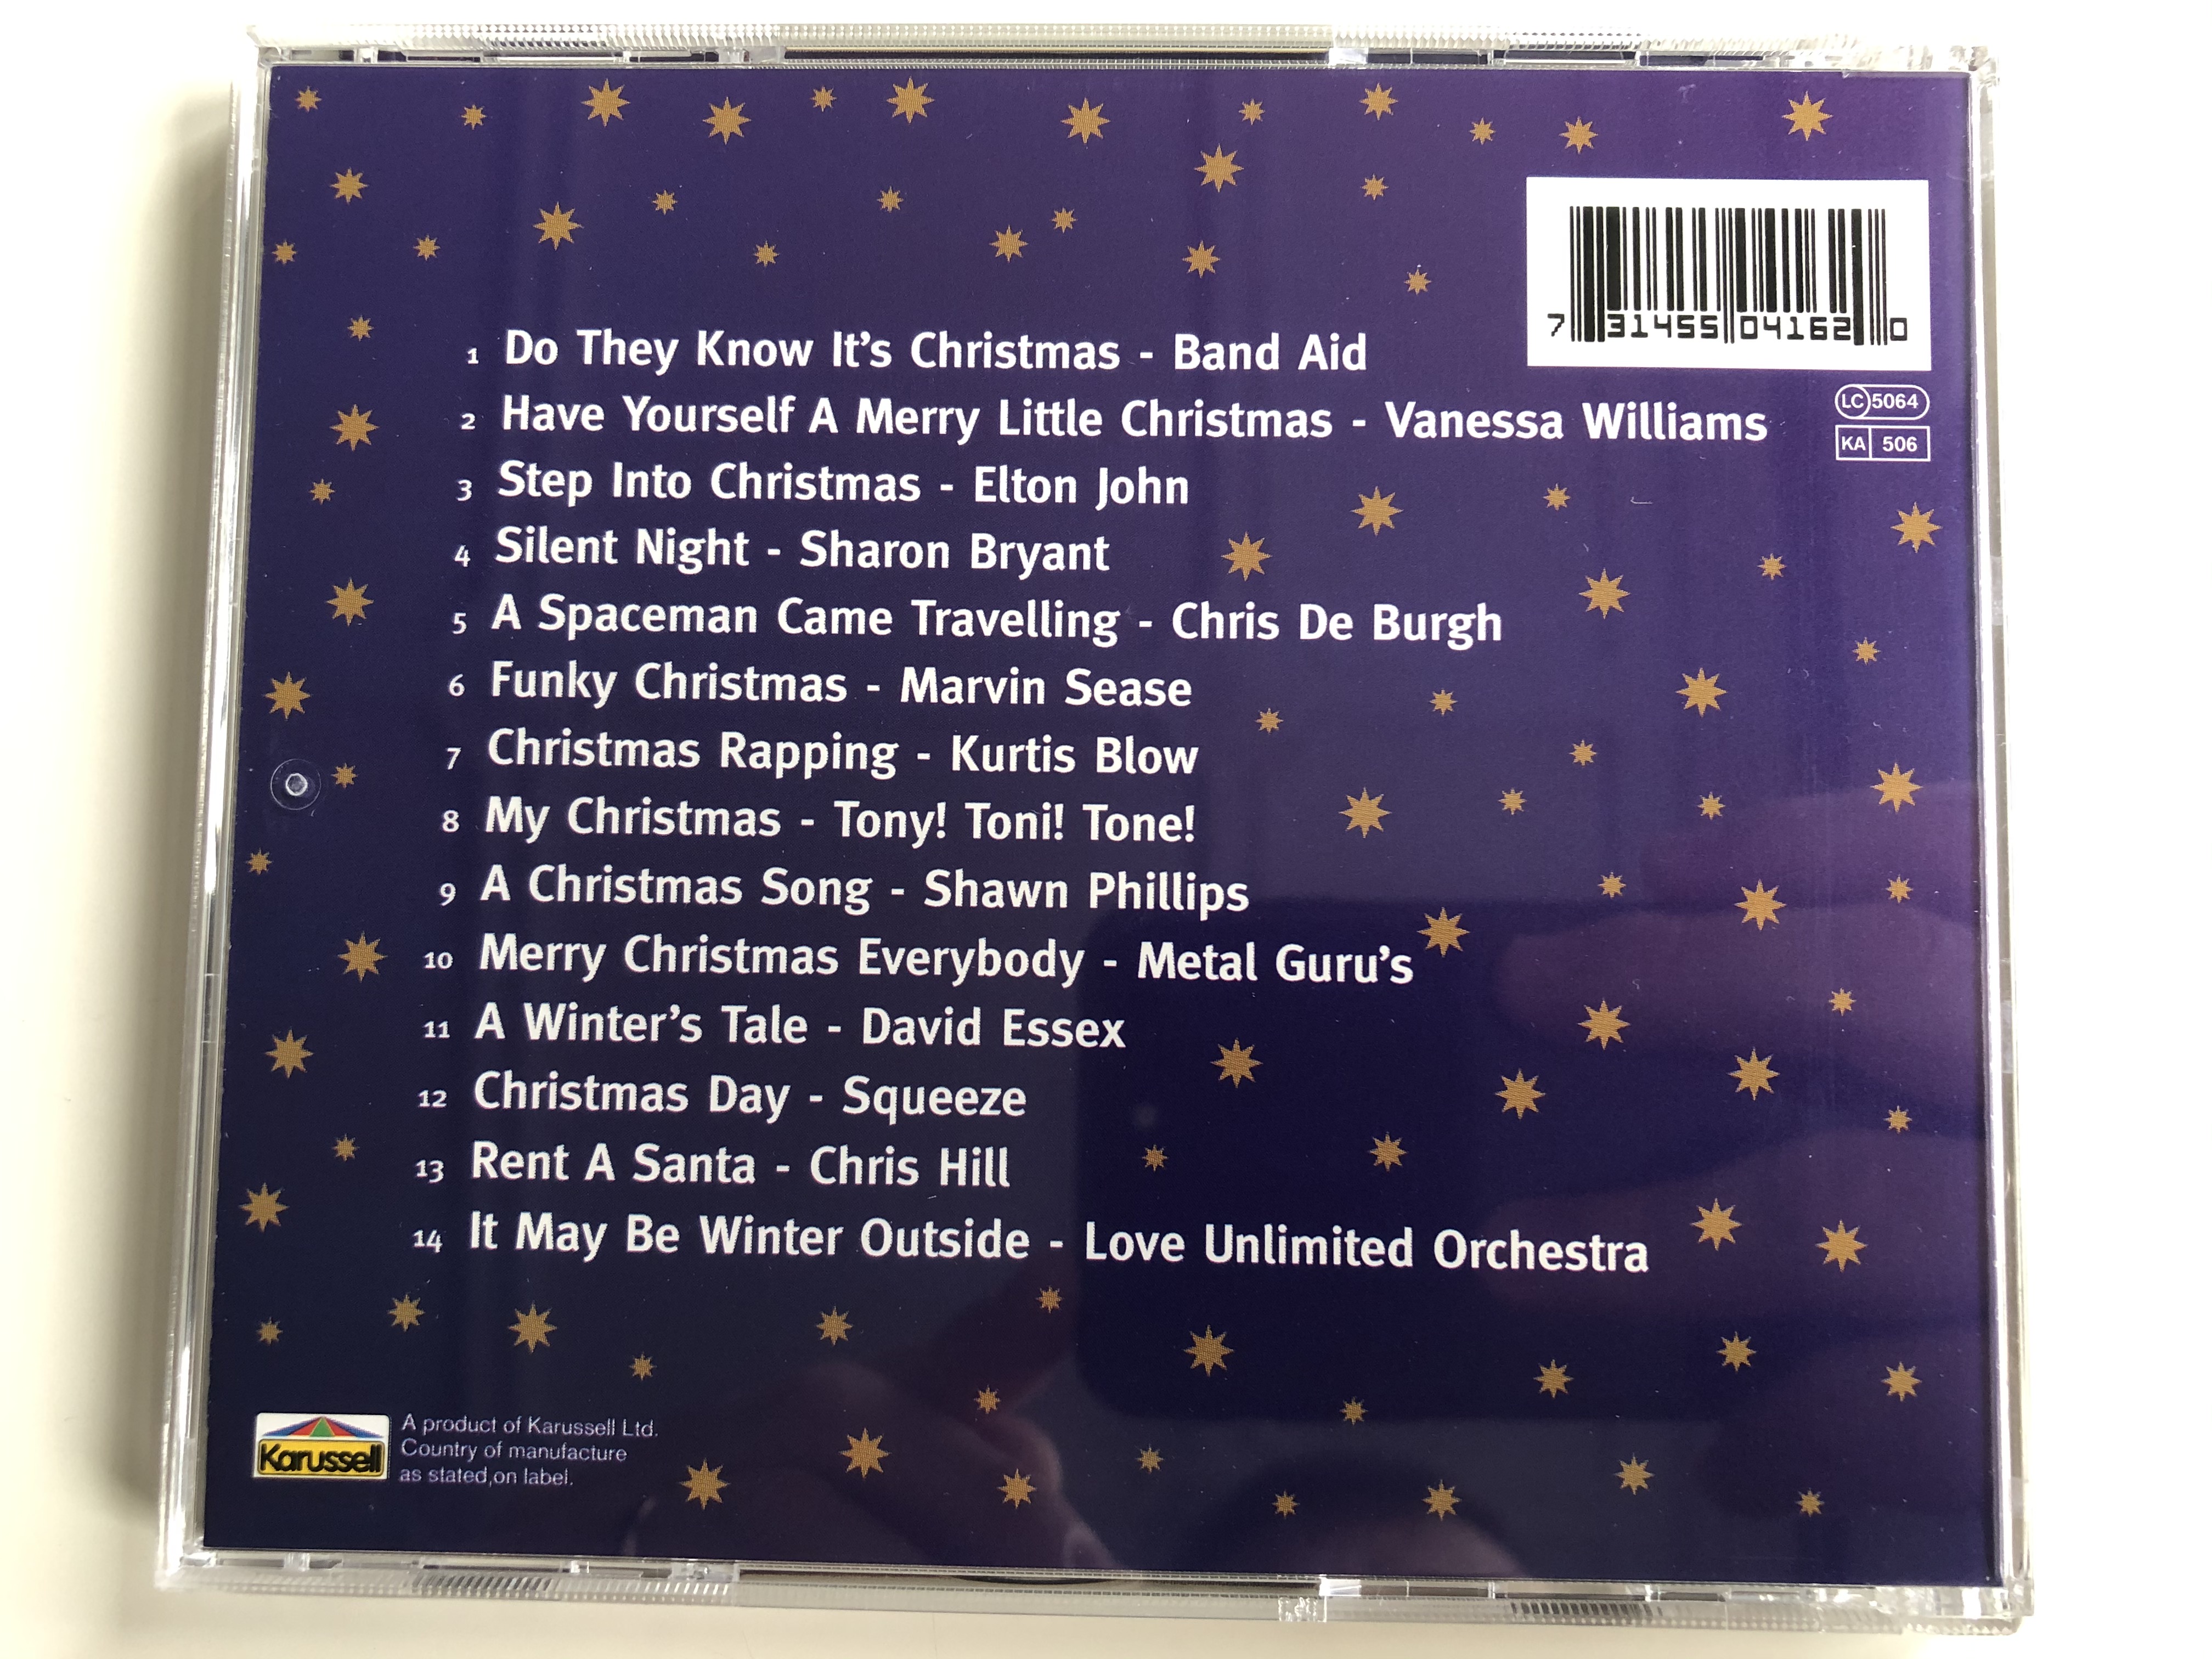 merry-christmas-from-band-aid-david-essex-chris-de-burgh-elton-john-and-others-karussell-audio-cd-1994-550-416-2-4-.jpg